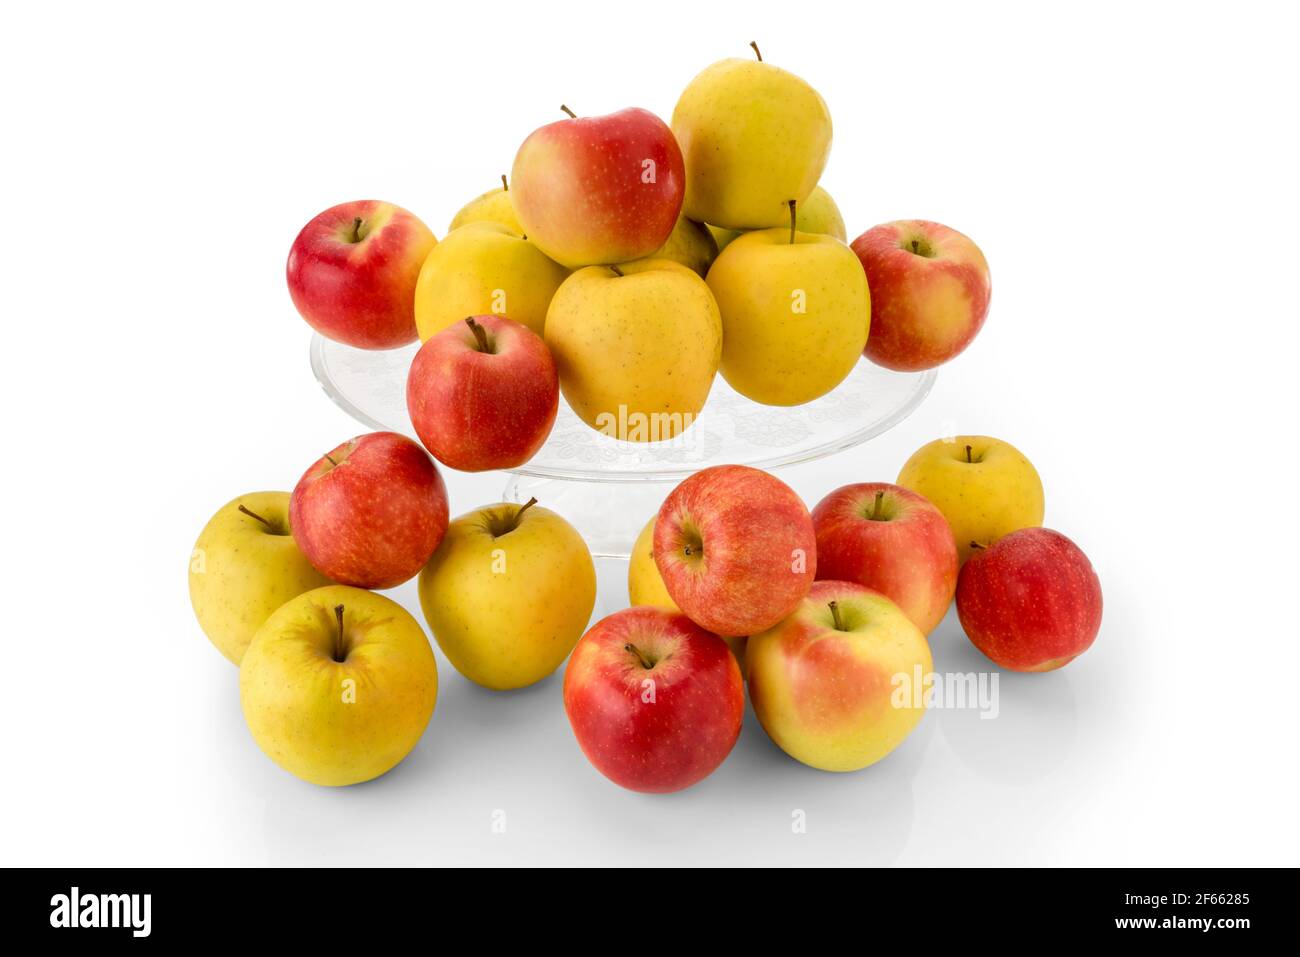 fuji apples and golden apples on clear glass raised plate, red and yellow fruits isolated on white background Stock Photo